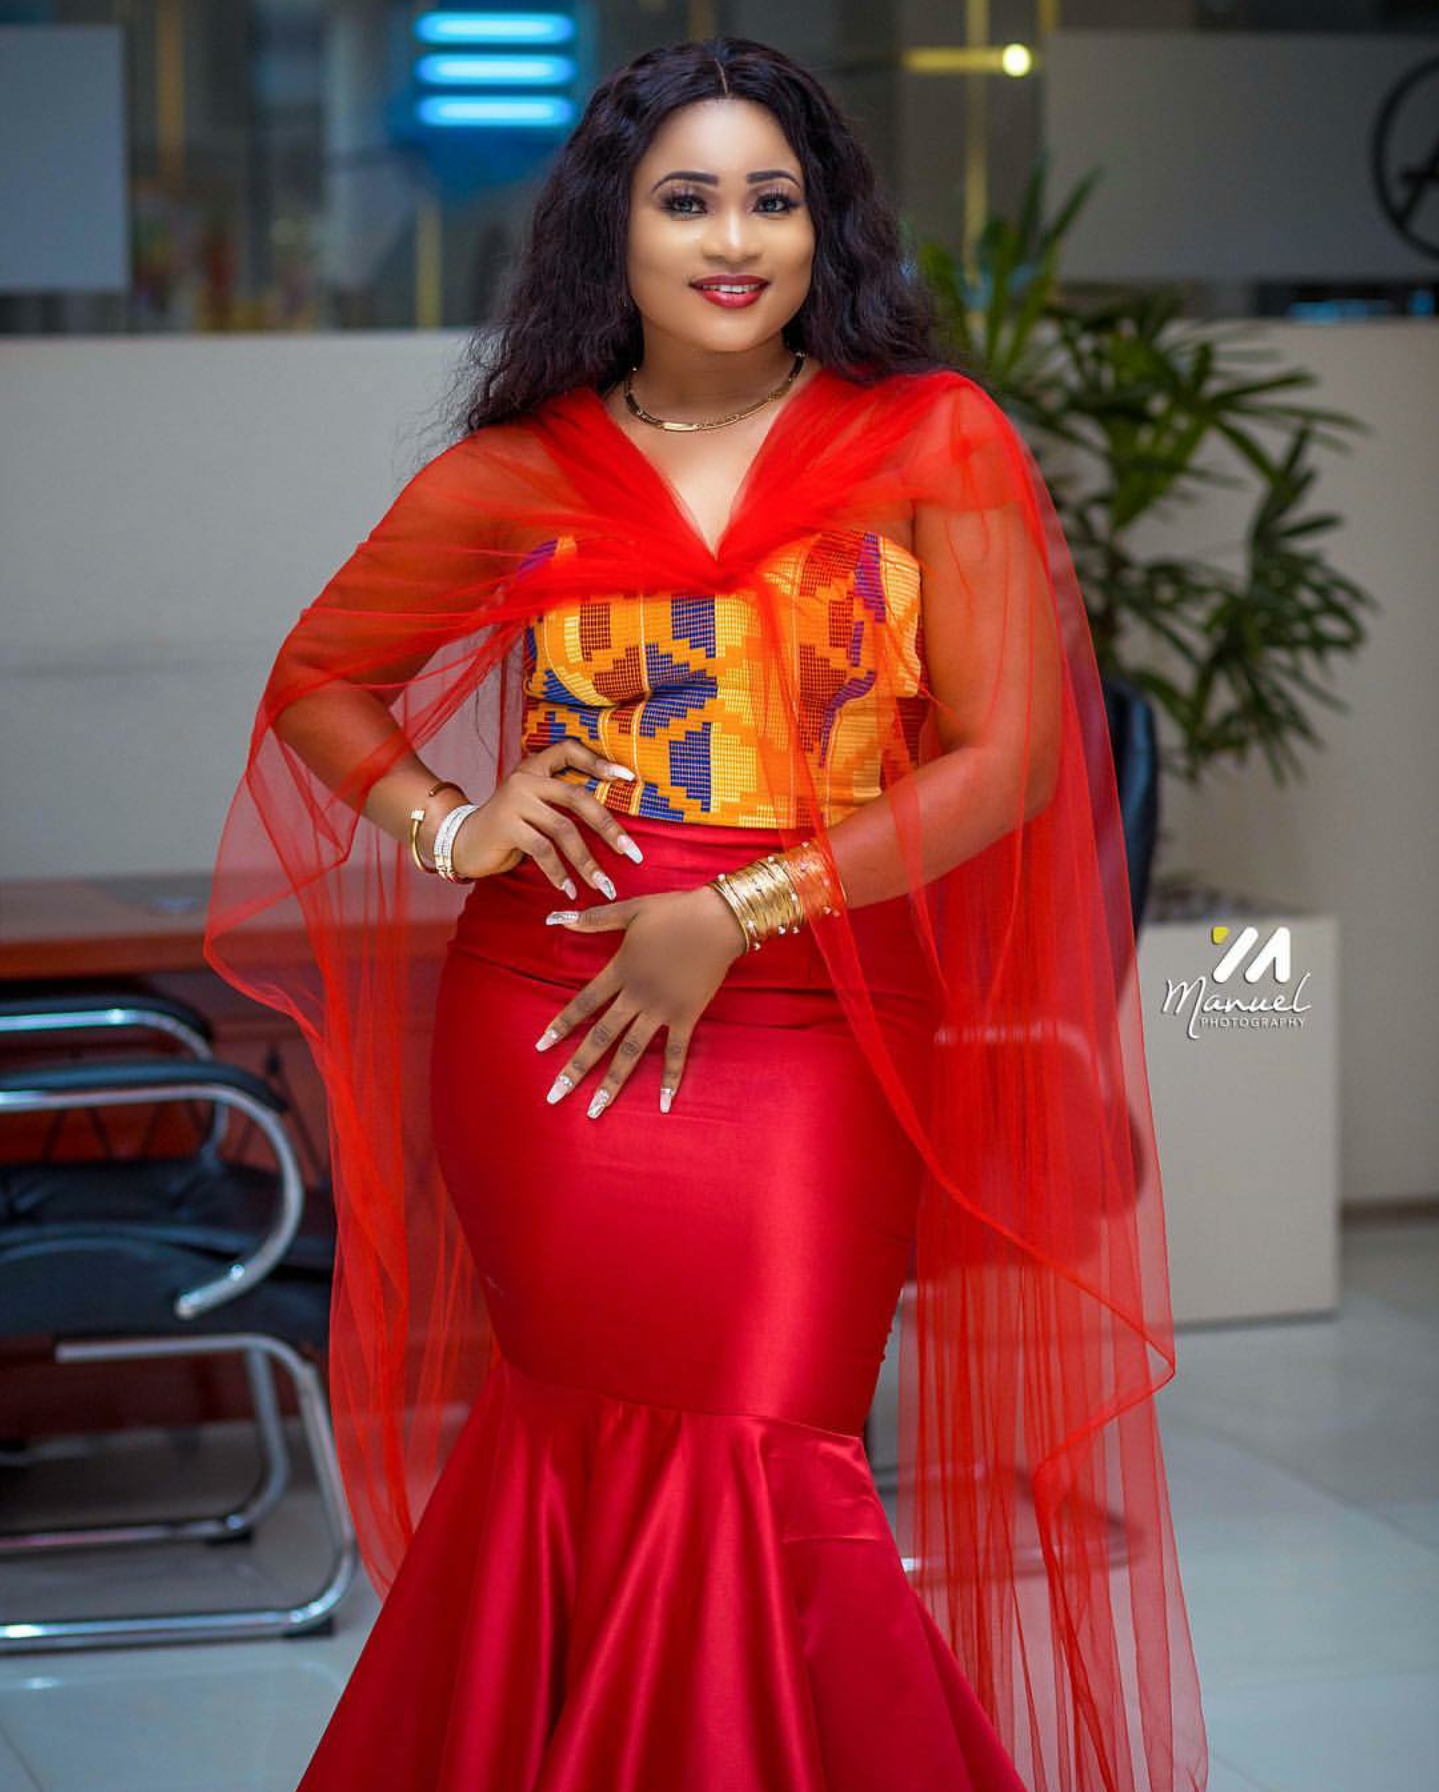 Christabel Ekeh looking stunning and serving style 